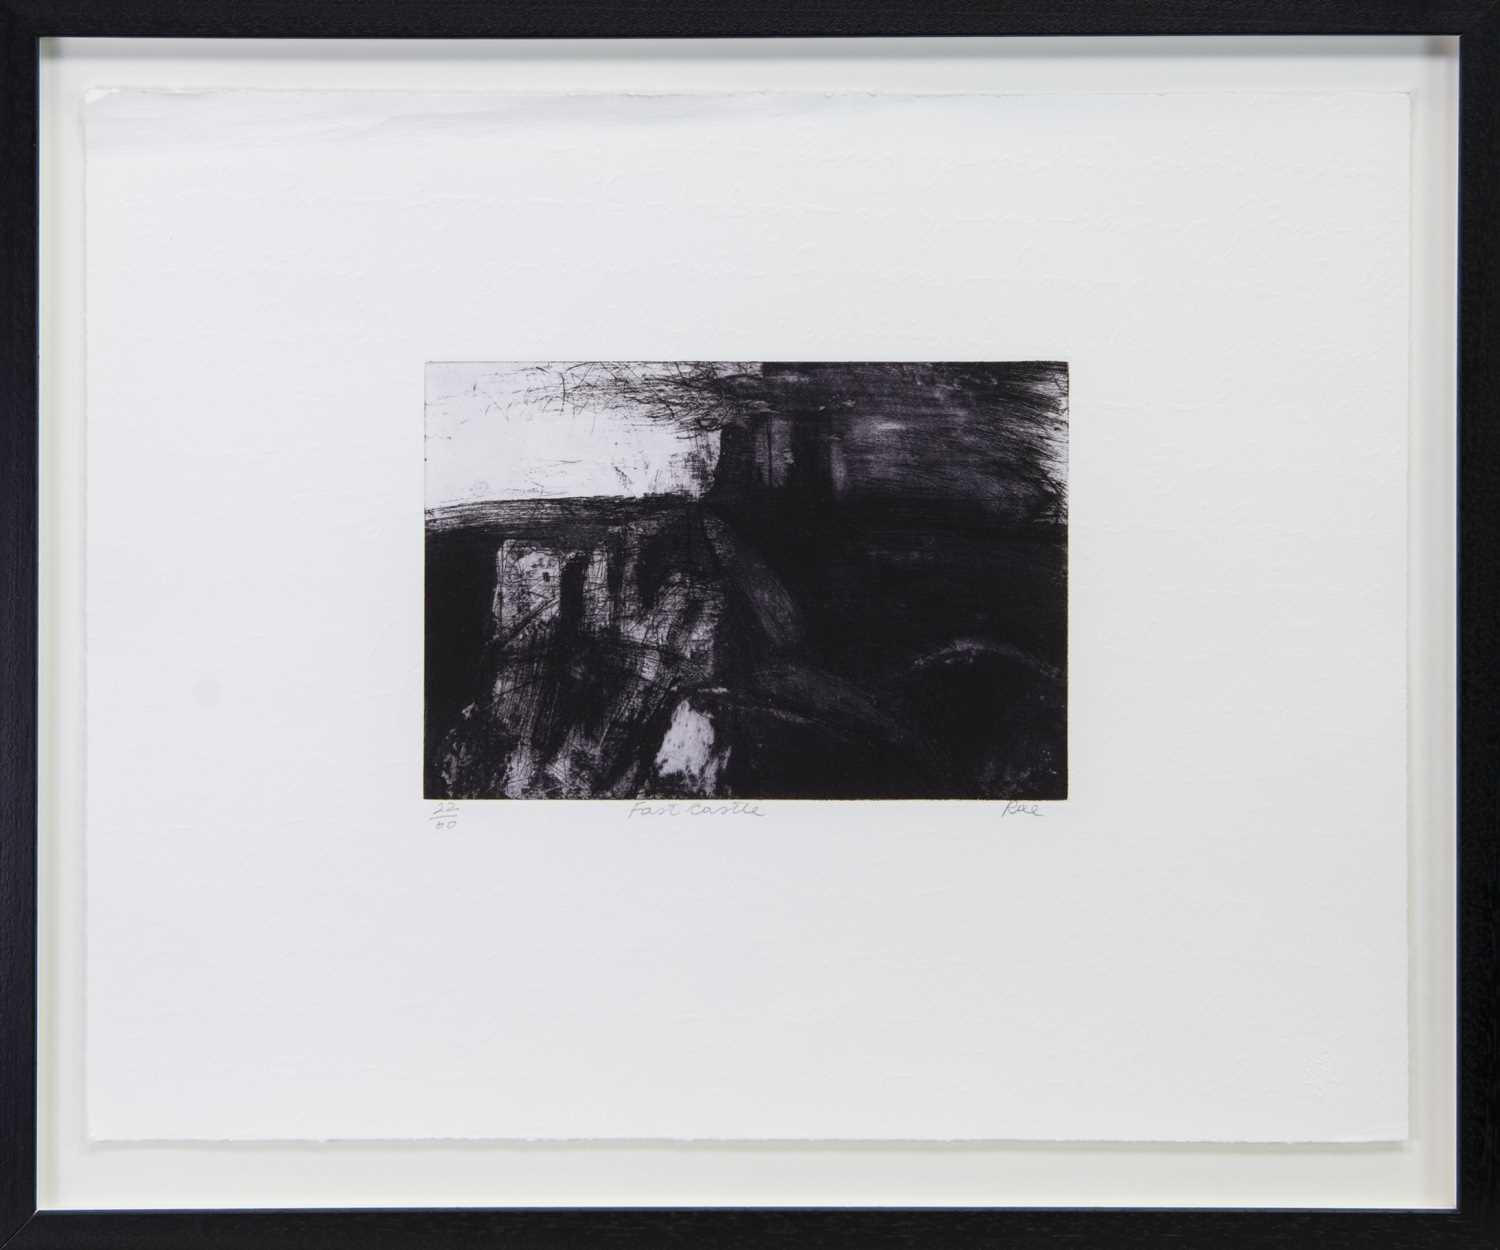 Lot 257 - FAST CASTLE, AN ETCHING BY BARBARA RAE